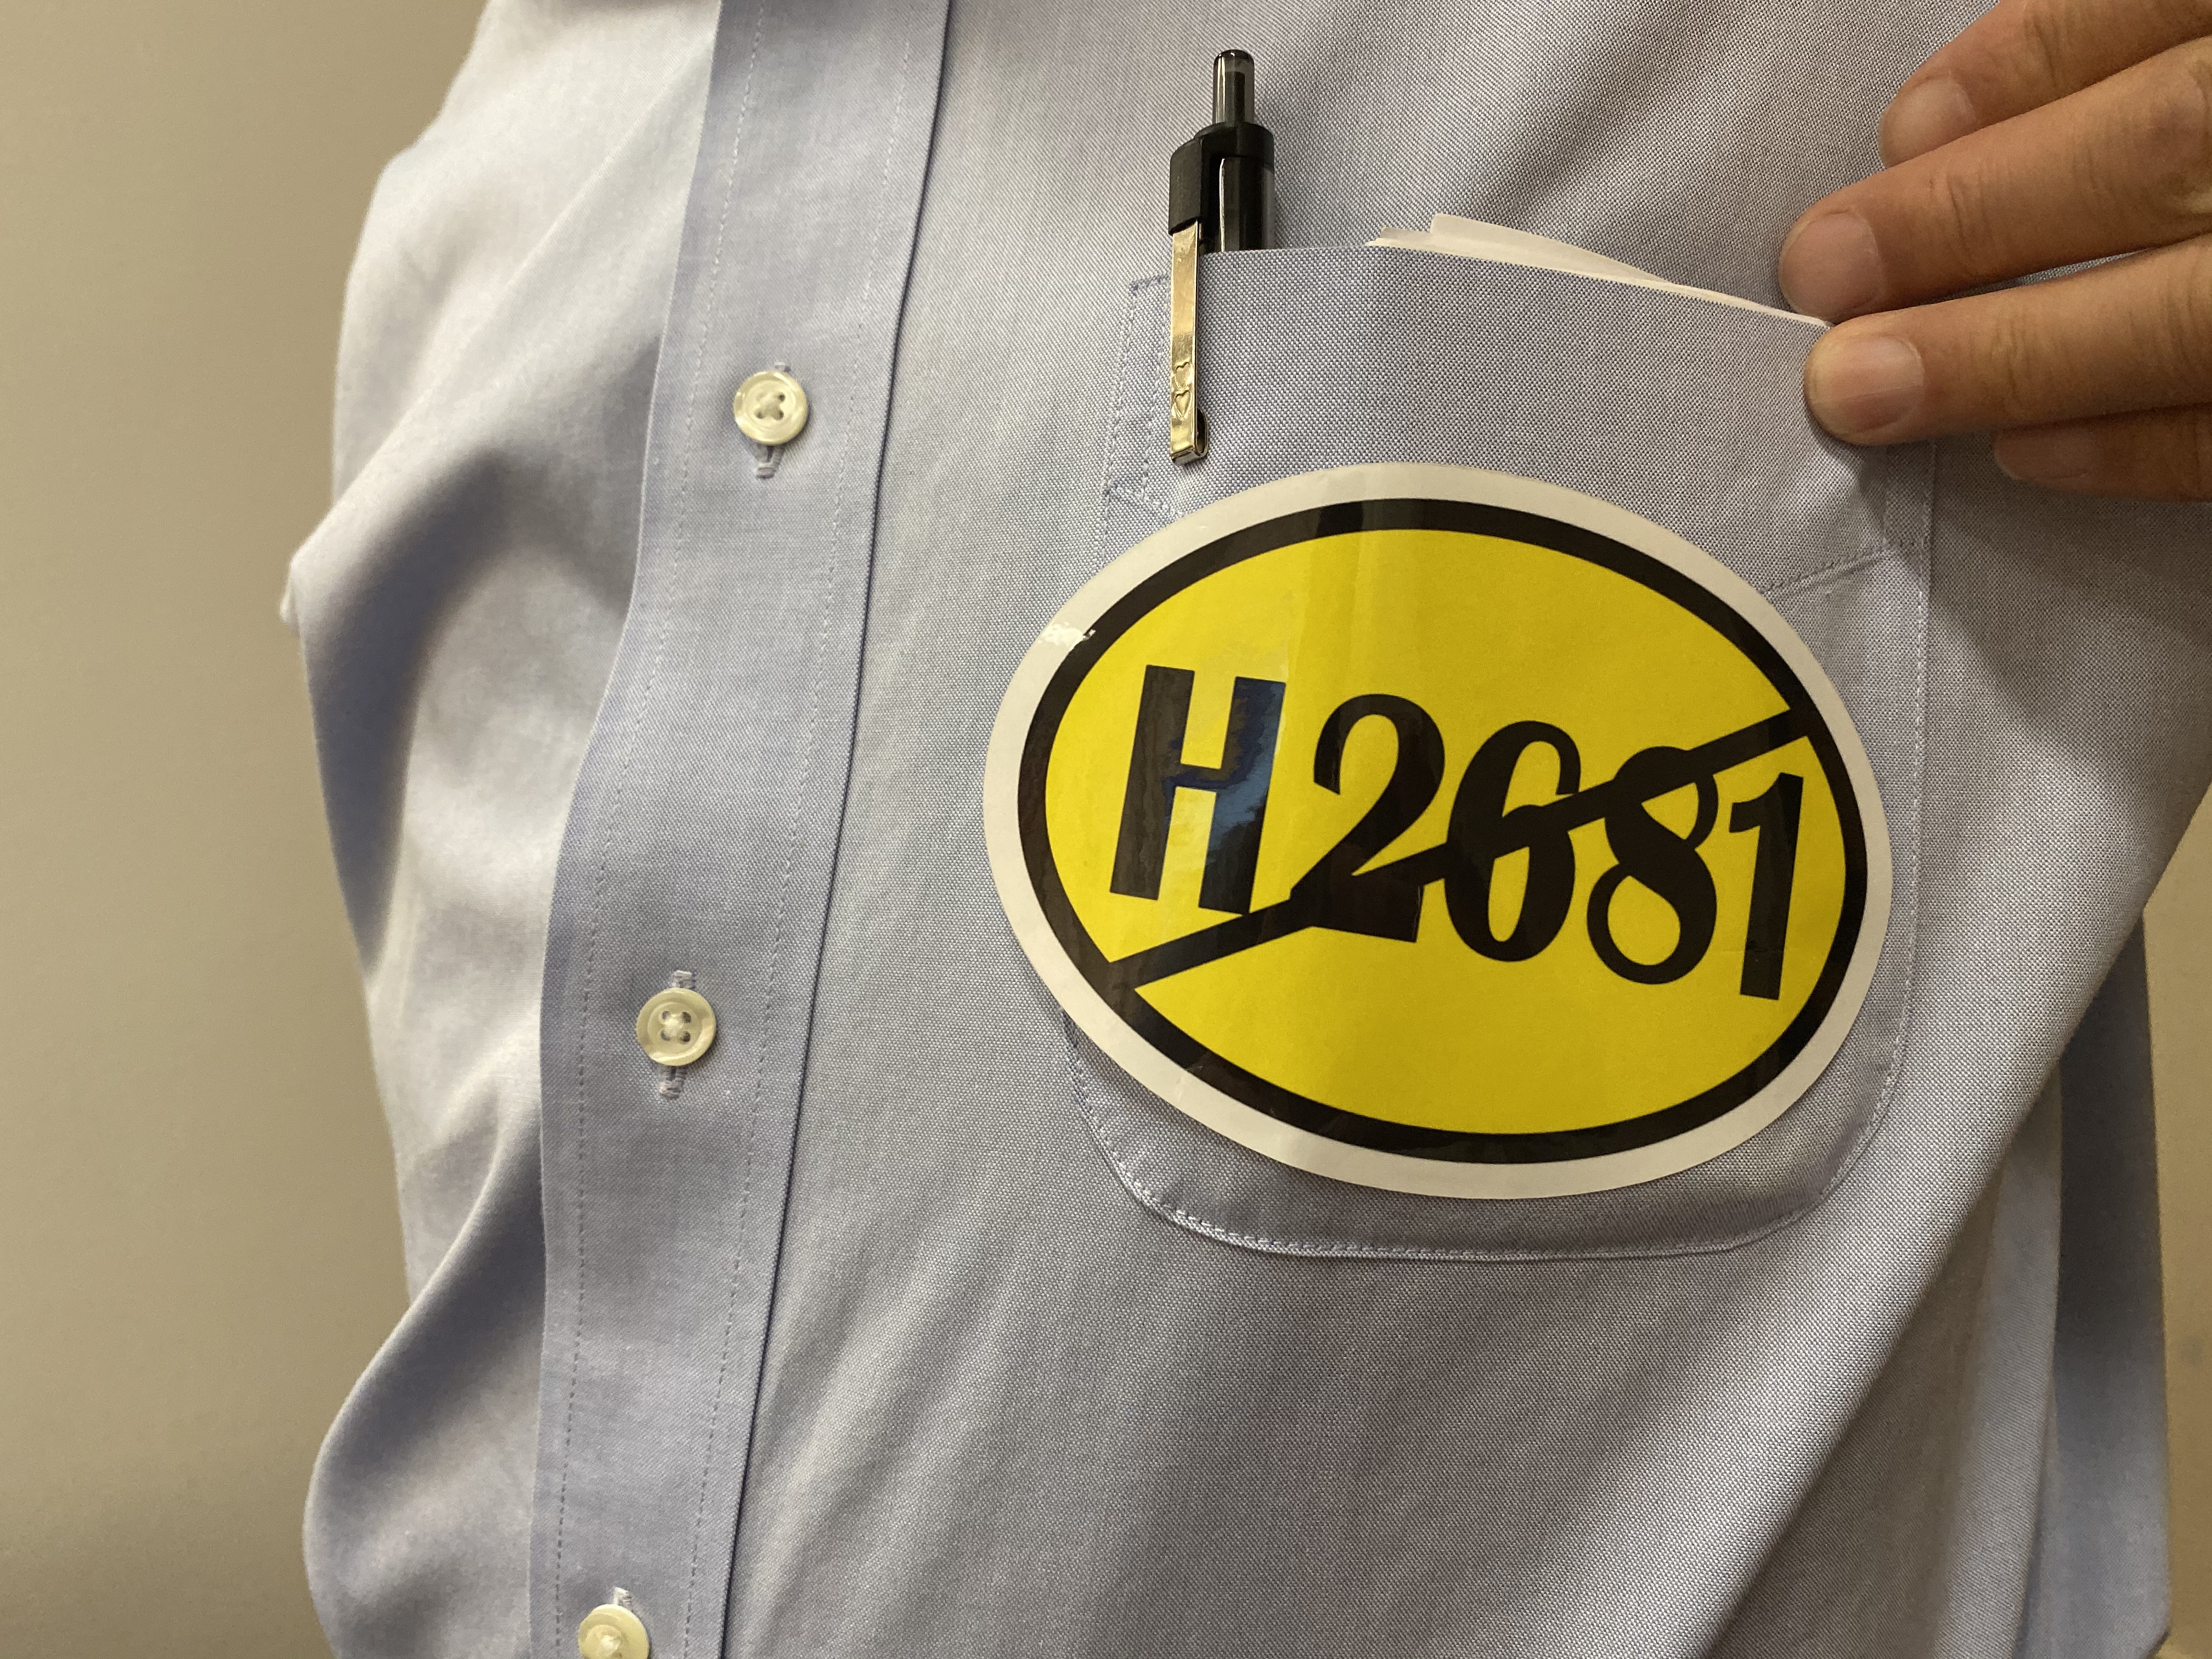 Opponents of the bill wore yellow stickers that read “H.2681” with a line through it. Photo by Alexa Gagosz.